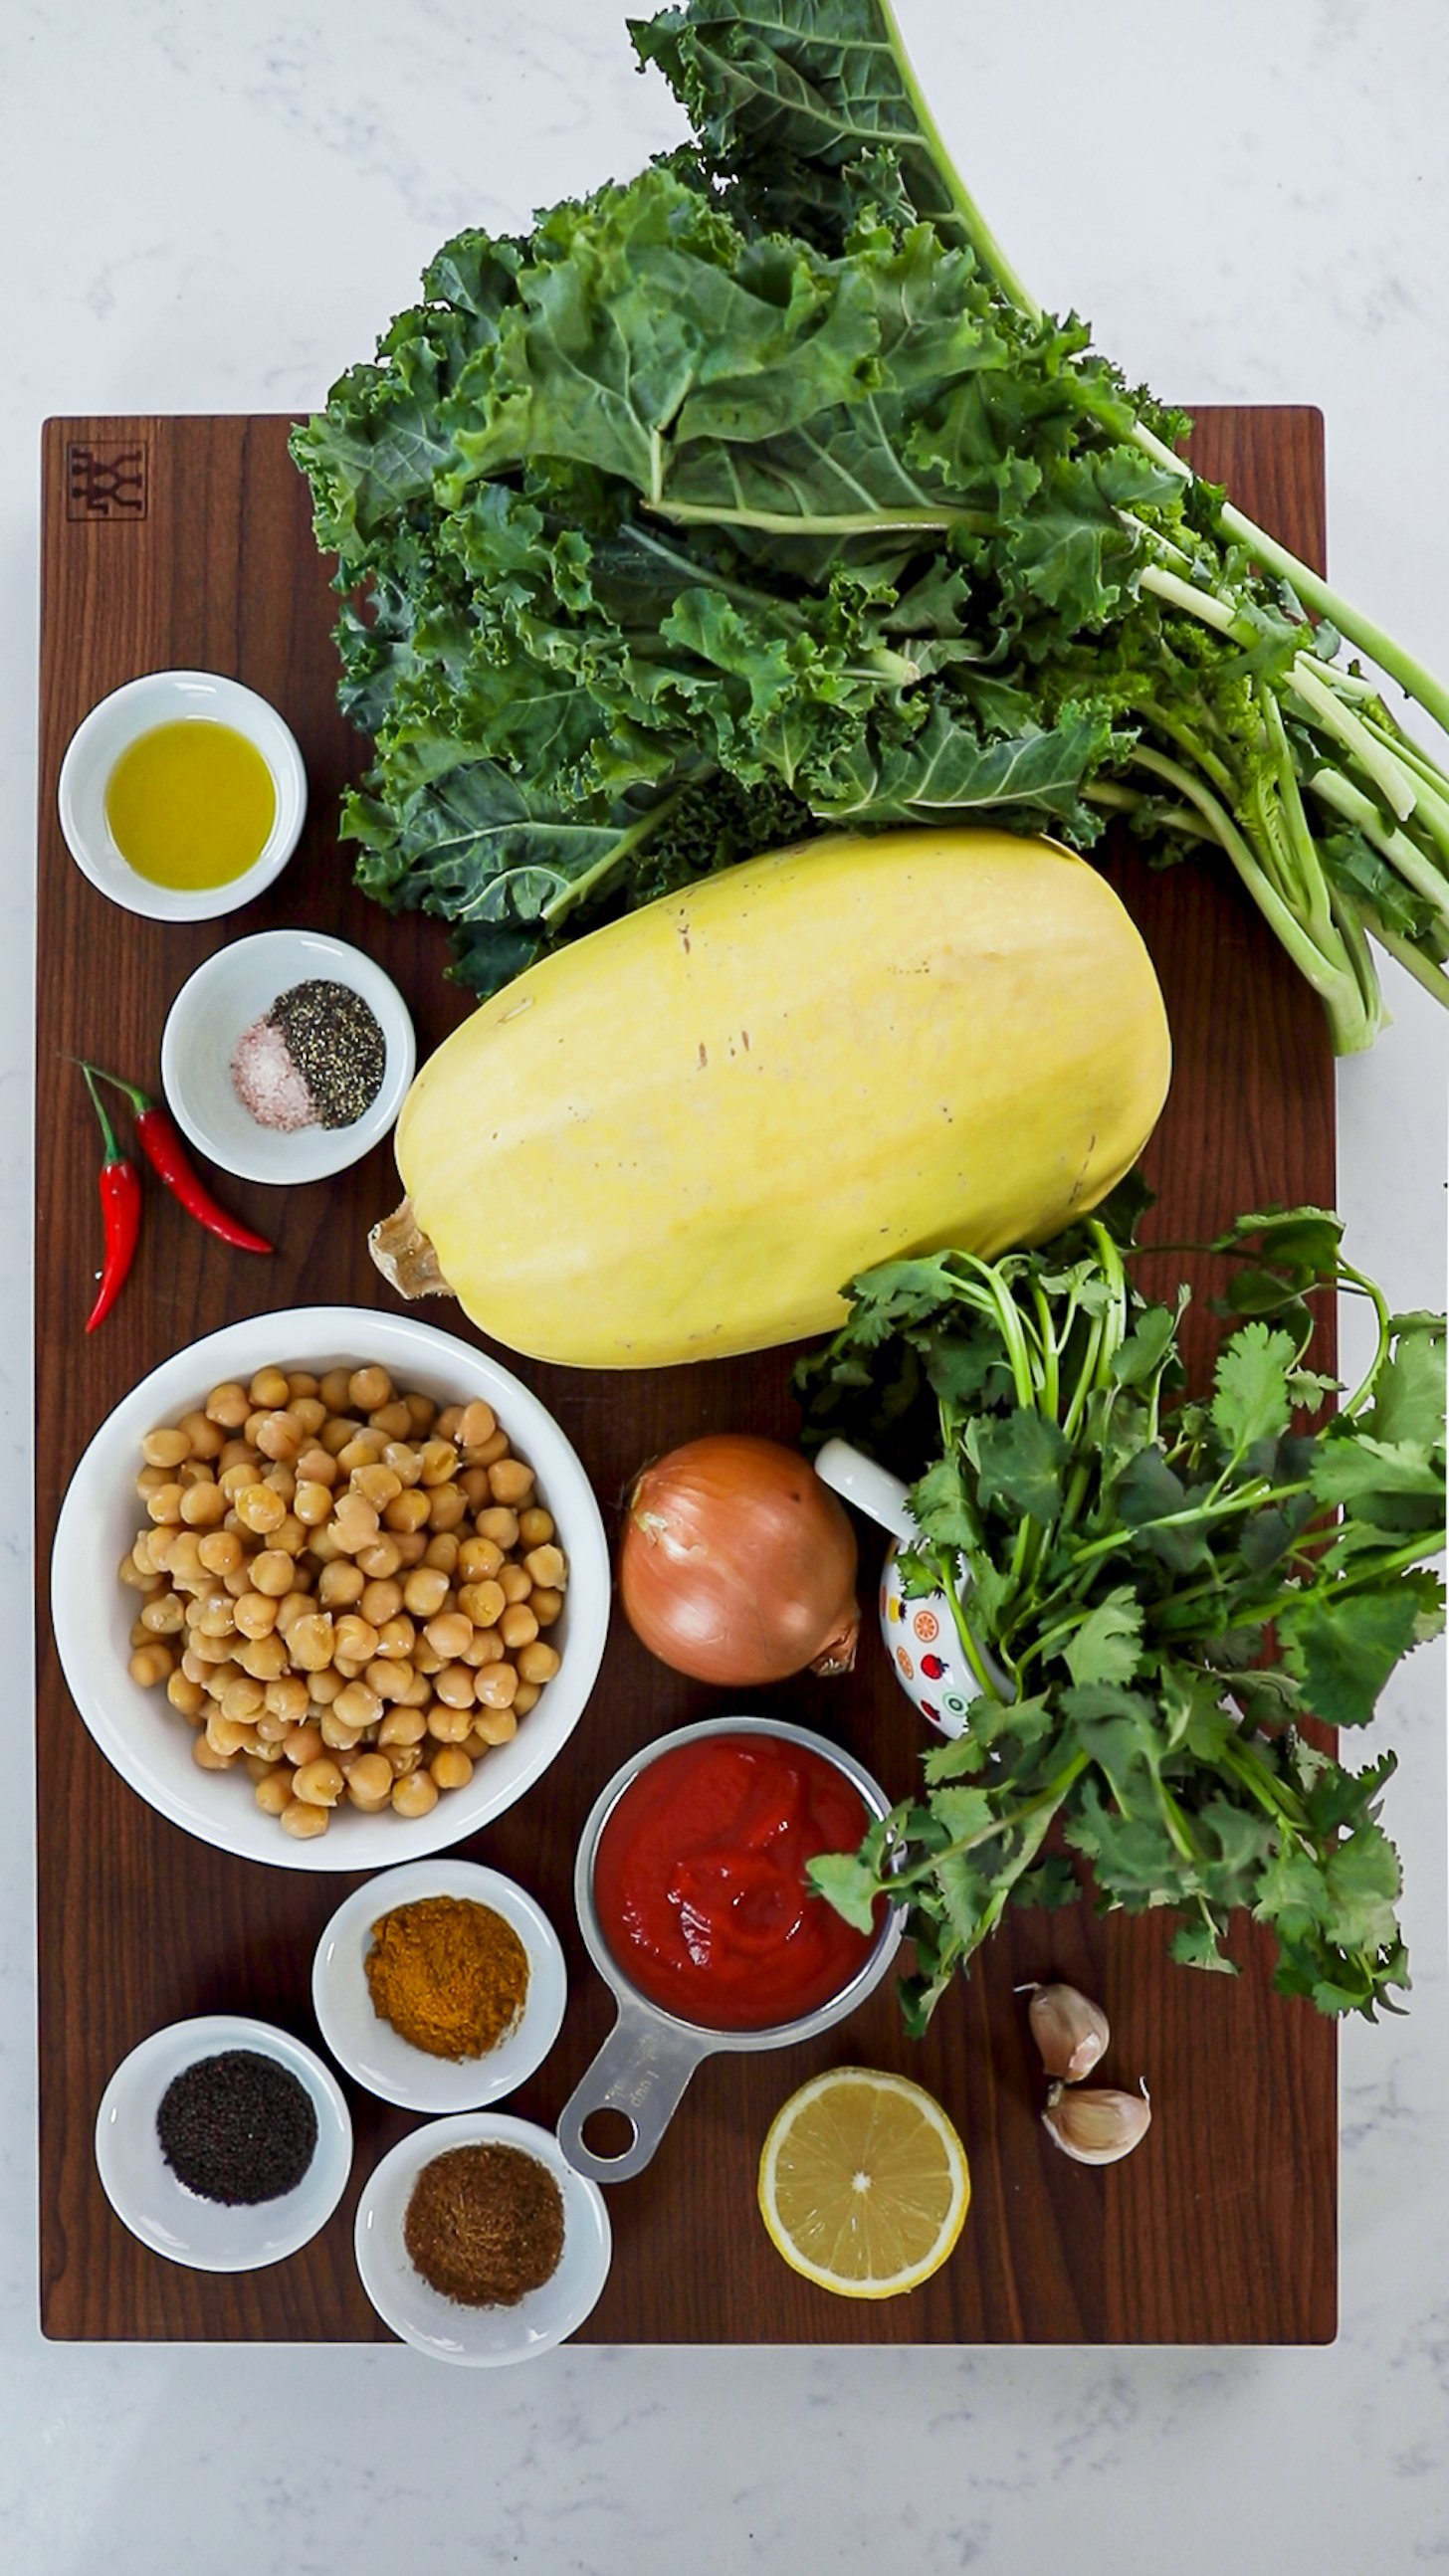 A collection of food ingredients including kale, spaghetti squash, chickpeas, herbs and spices in ramekins.